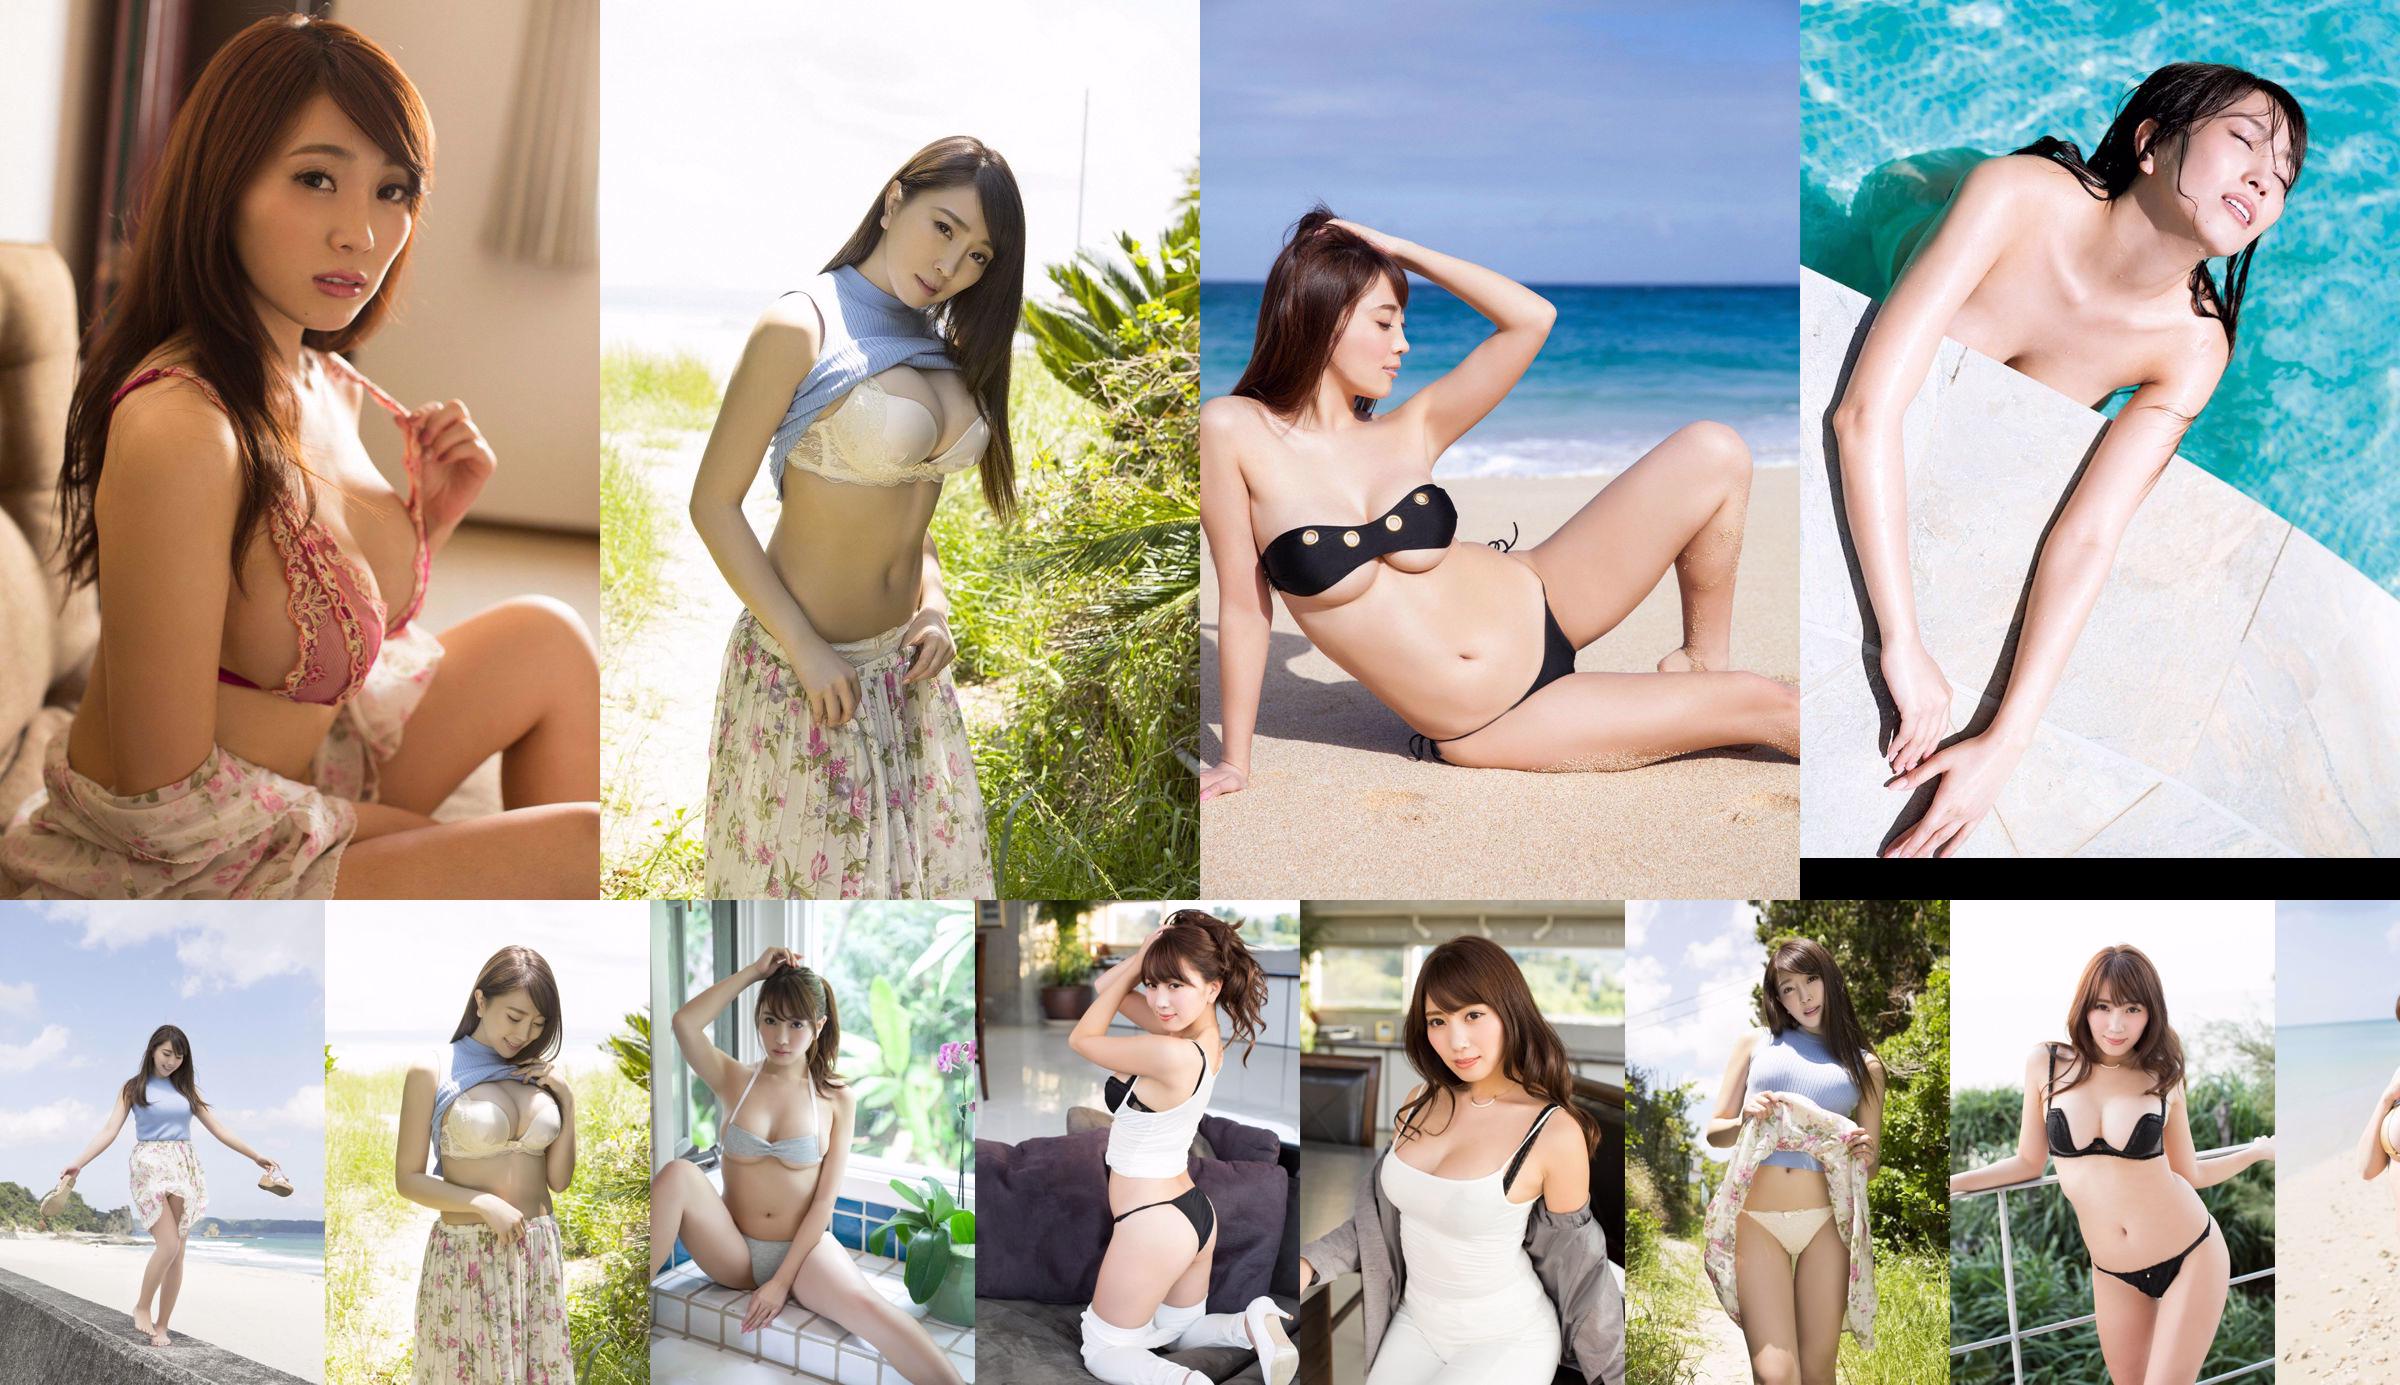 Yume Takeda Yume Takeda / Yume Takeda [Graphis] Gravure First off daughter No.9fc5e9 Page 1